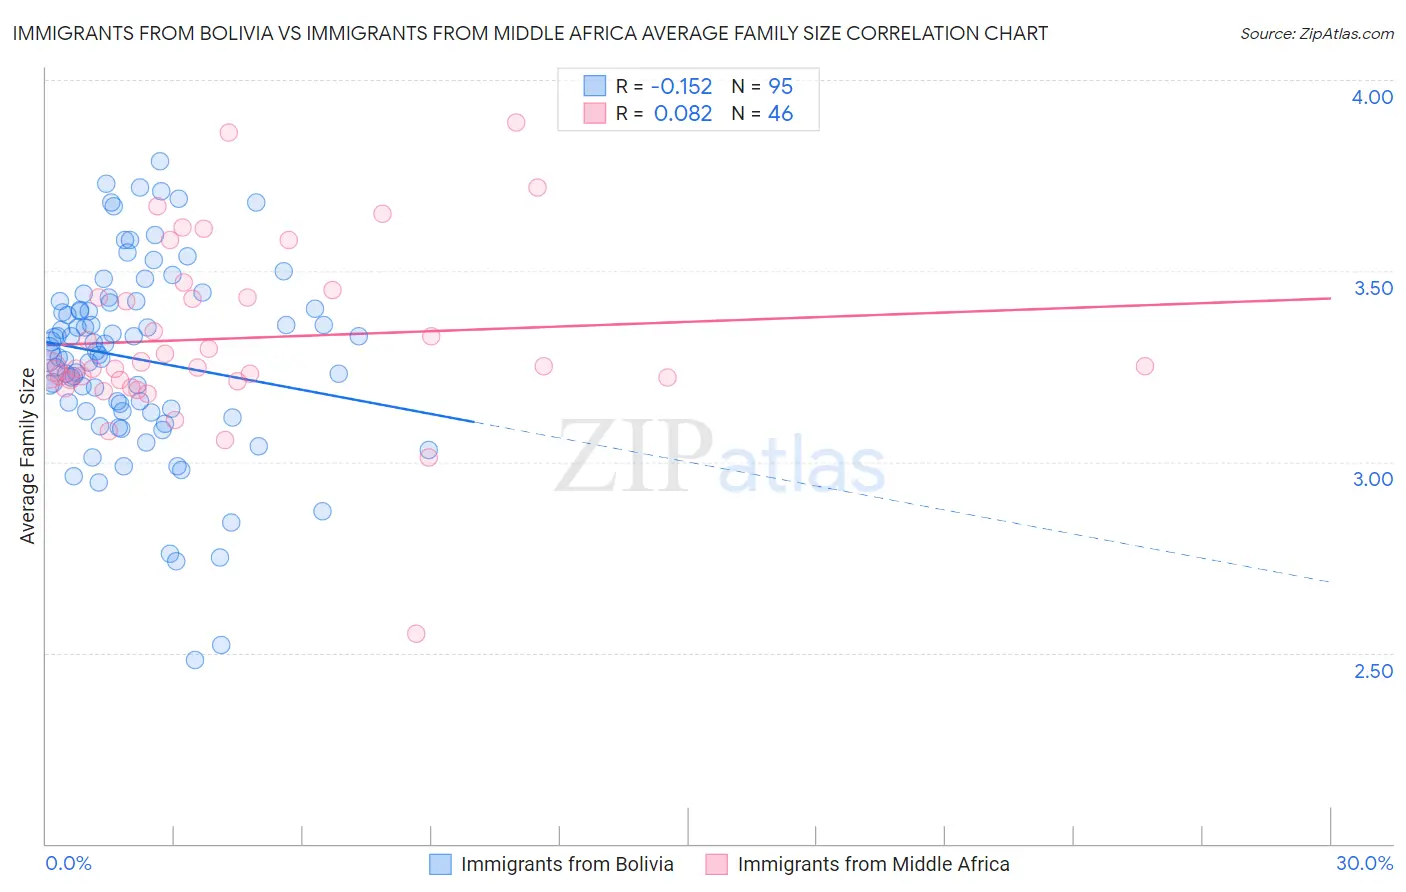 Immigrants from Bolivia vs Immigrants from Middle Africa Average Family Size